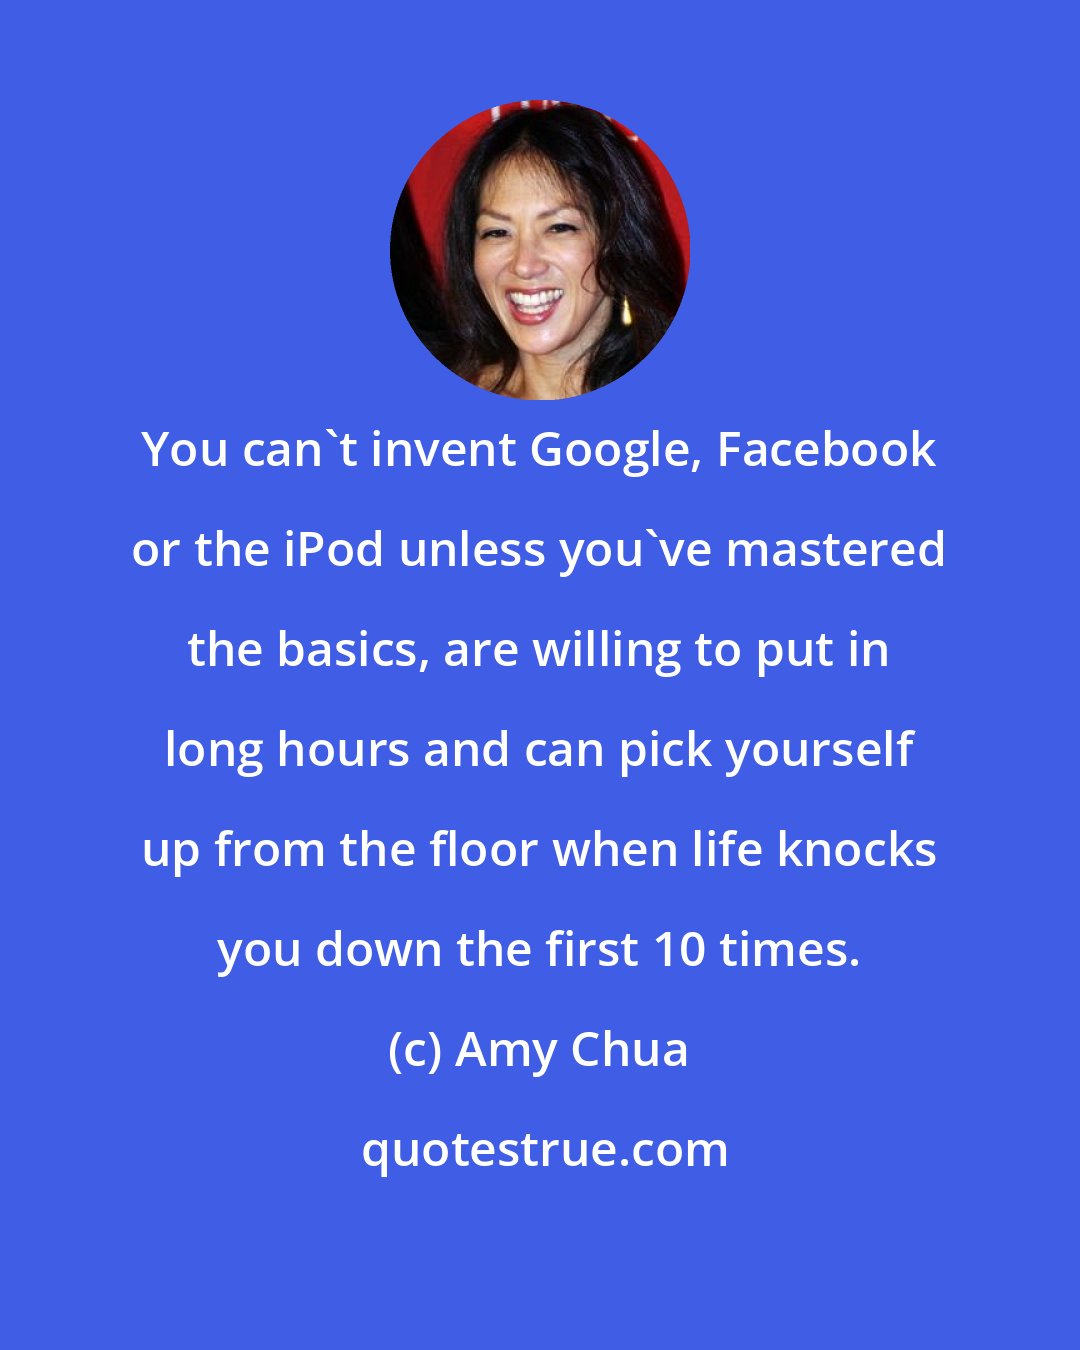 Amy Chua: You can't invent Google, Facebook or the iPod unless you've mastered the basics, are willing to put in long hours and can pick yourself up from the floor when life knocks you down the first 10 times.